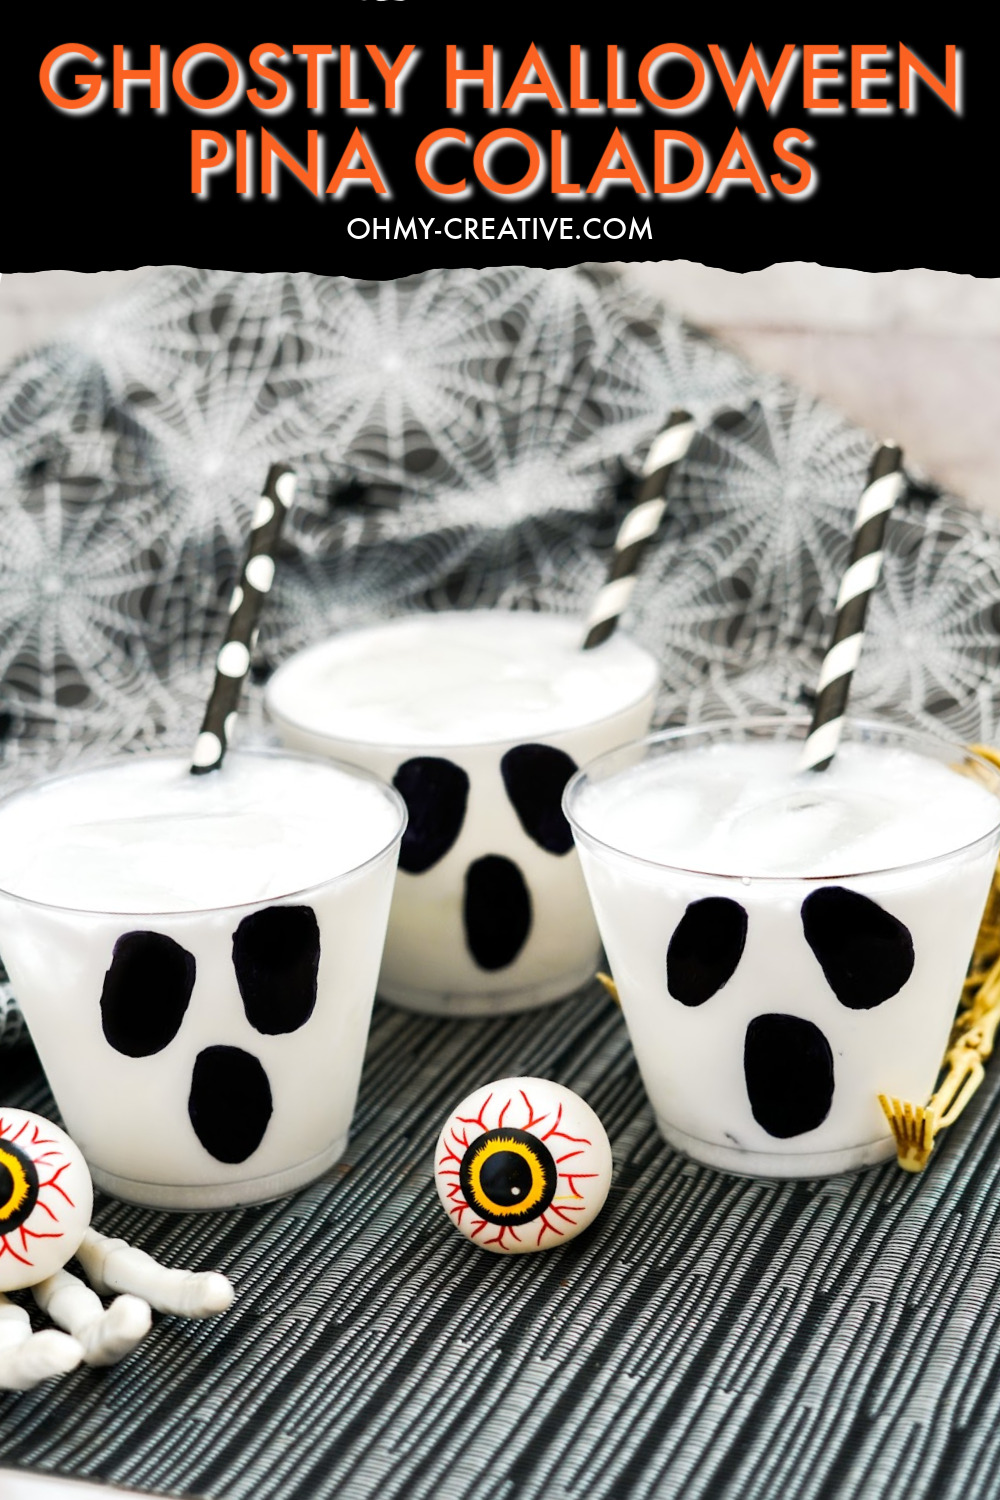 These ghost Halloween pina coladas are sitting on a black and white striped background with a spider web print in the background. Plastic eye balls and skeleton hands make this a spooky Halloween drink!